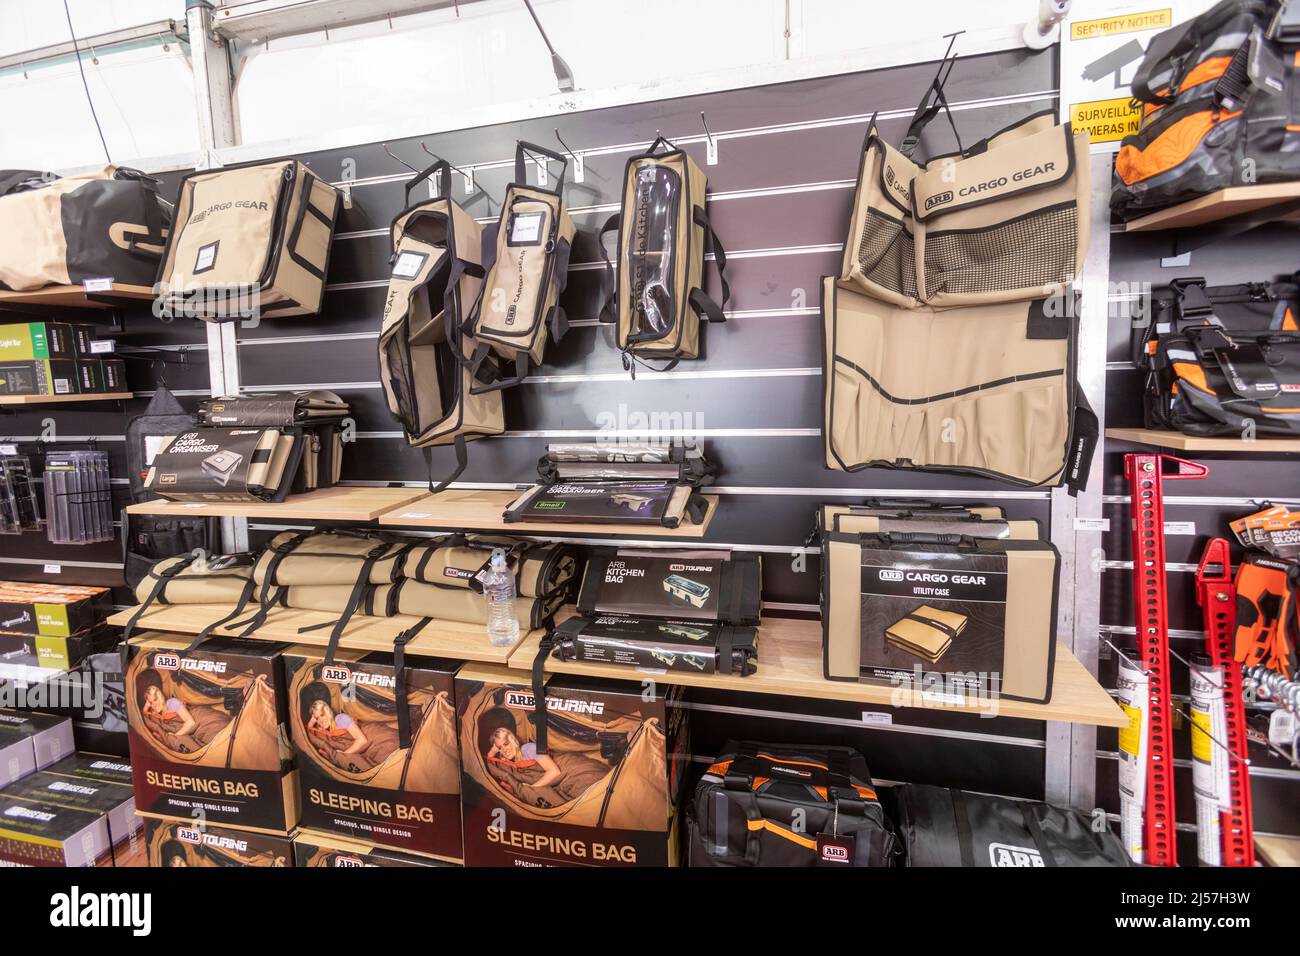 Australia, ARB outdoor living and adventure accessories being sold at the Sydney camping and caravan show, Sydney,Australia Stock Photo